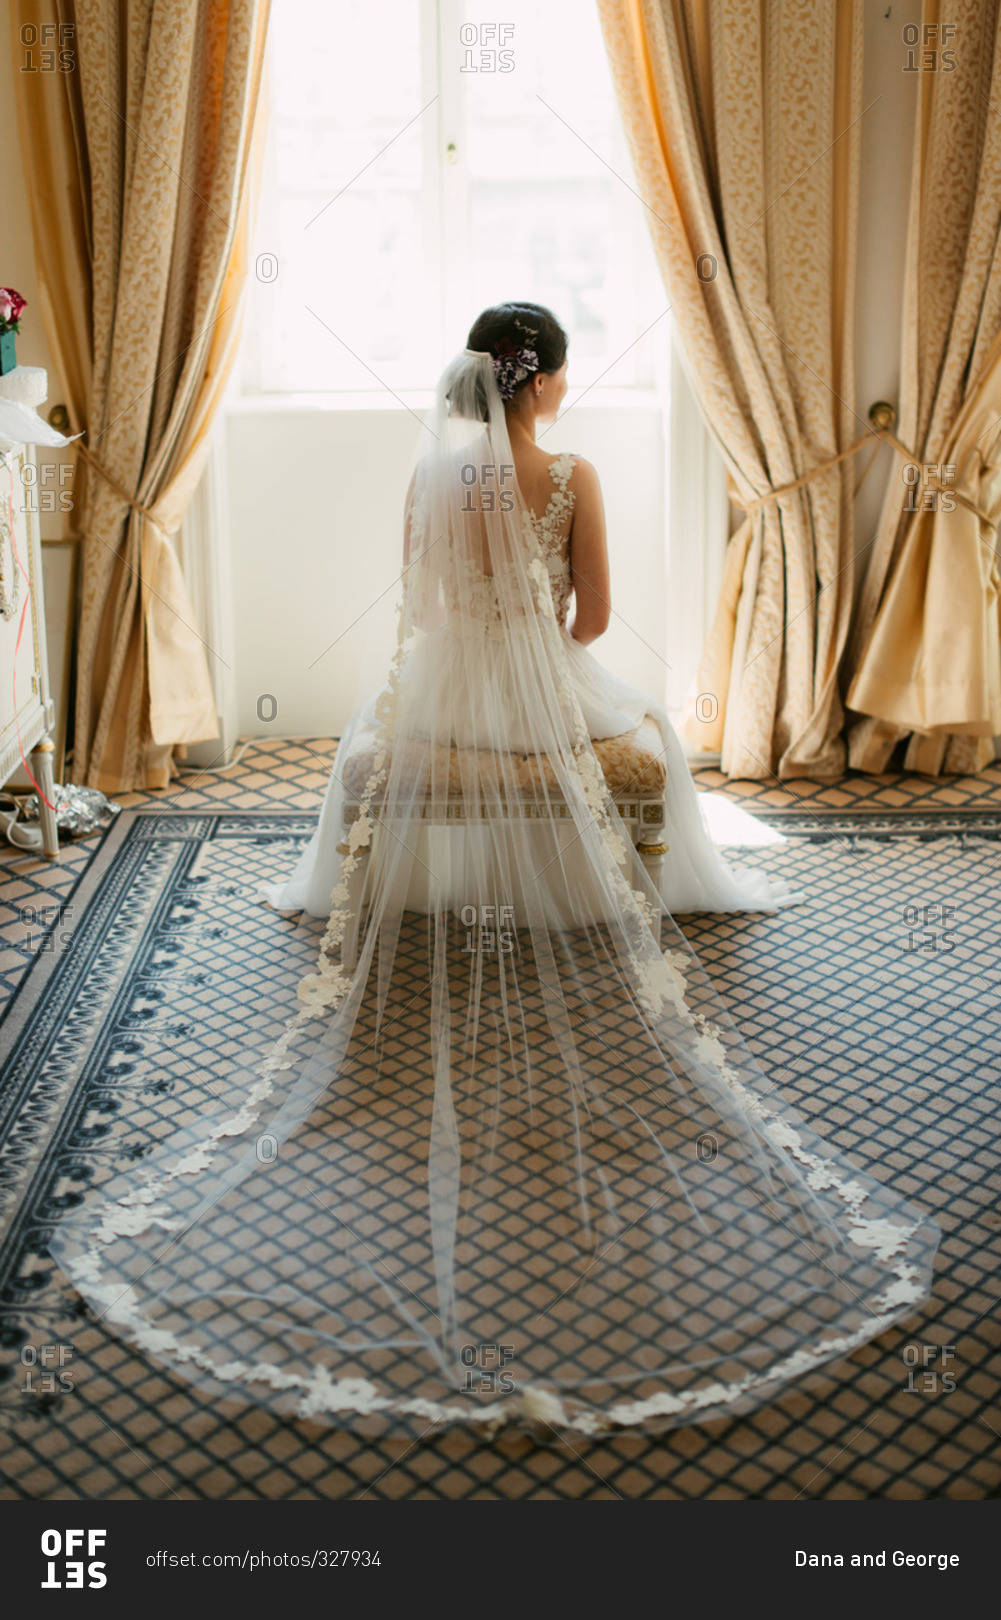 Back view of elegant seated bride with veil spread out behind her